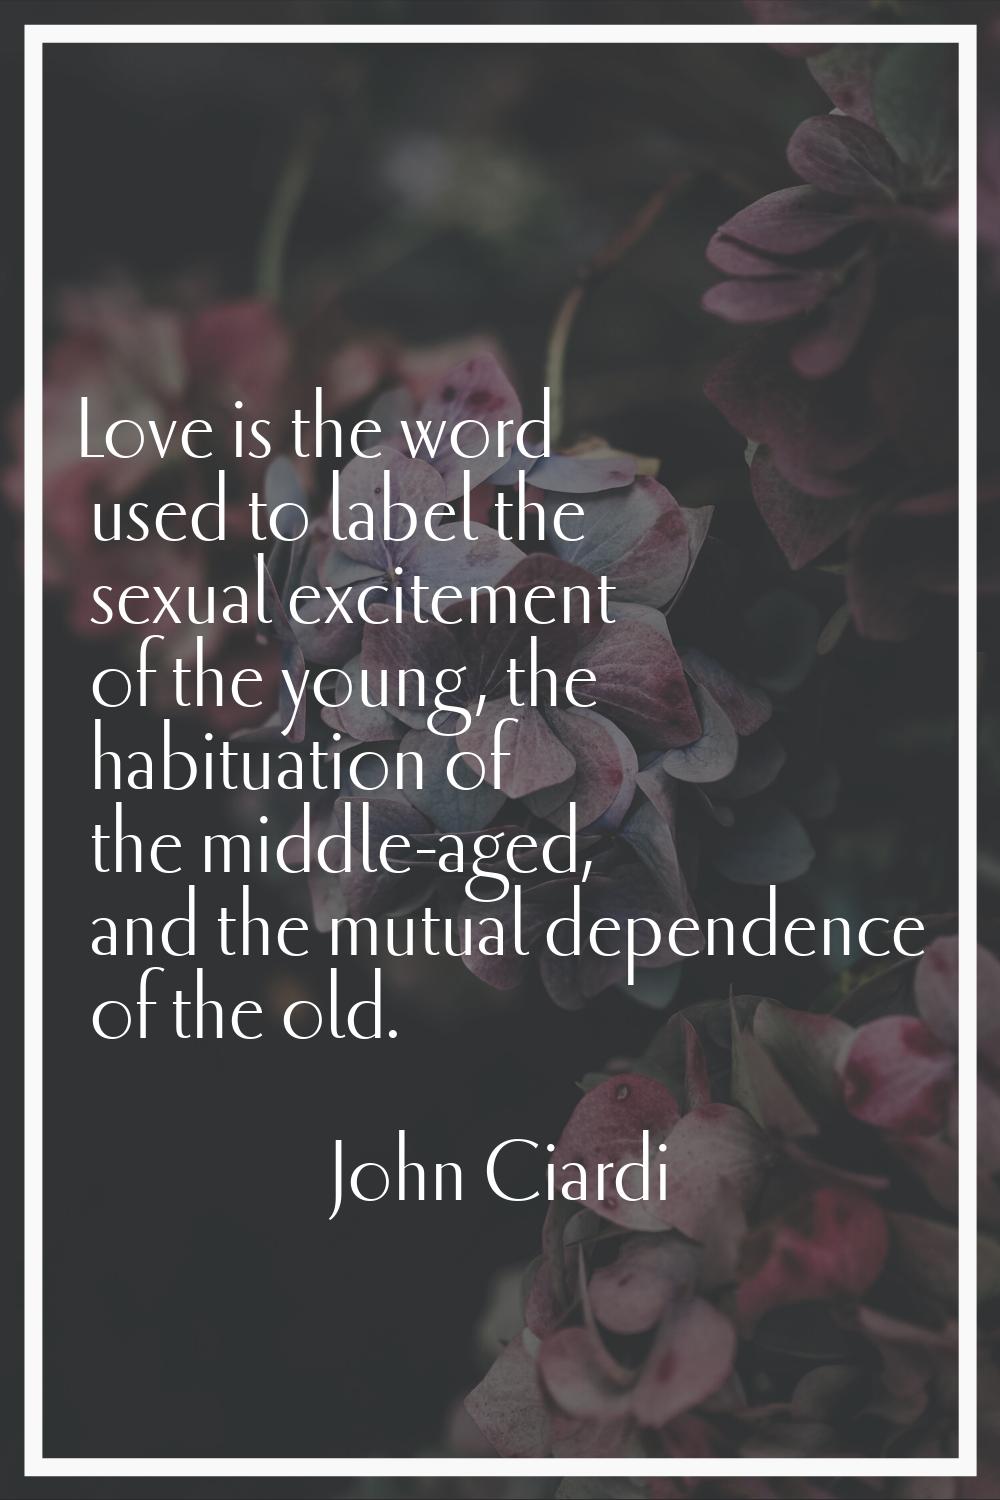 Love is the word used to label the sexual excitement of the young, the habituation of the middle-ag